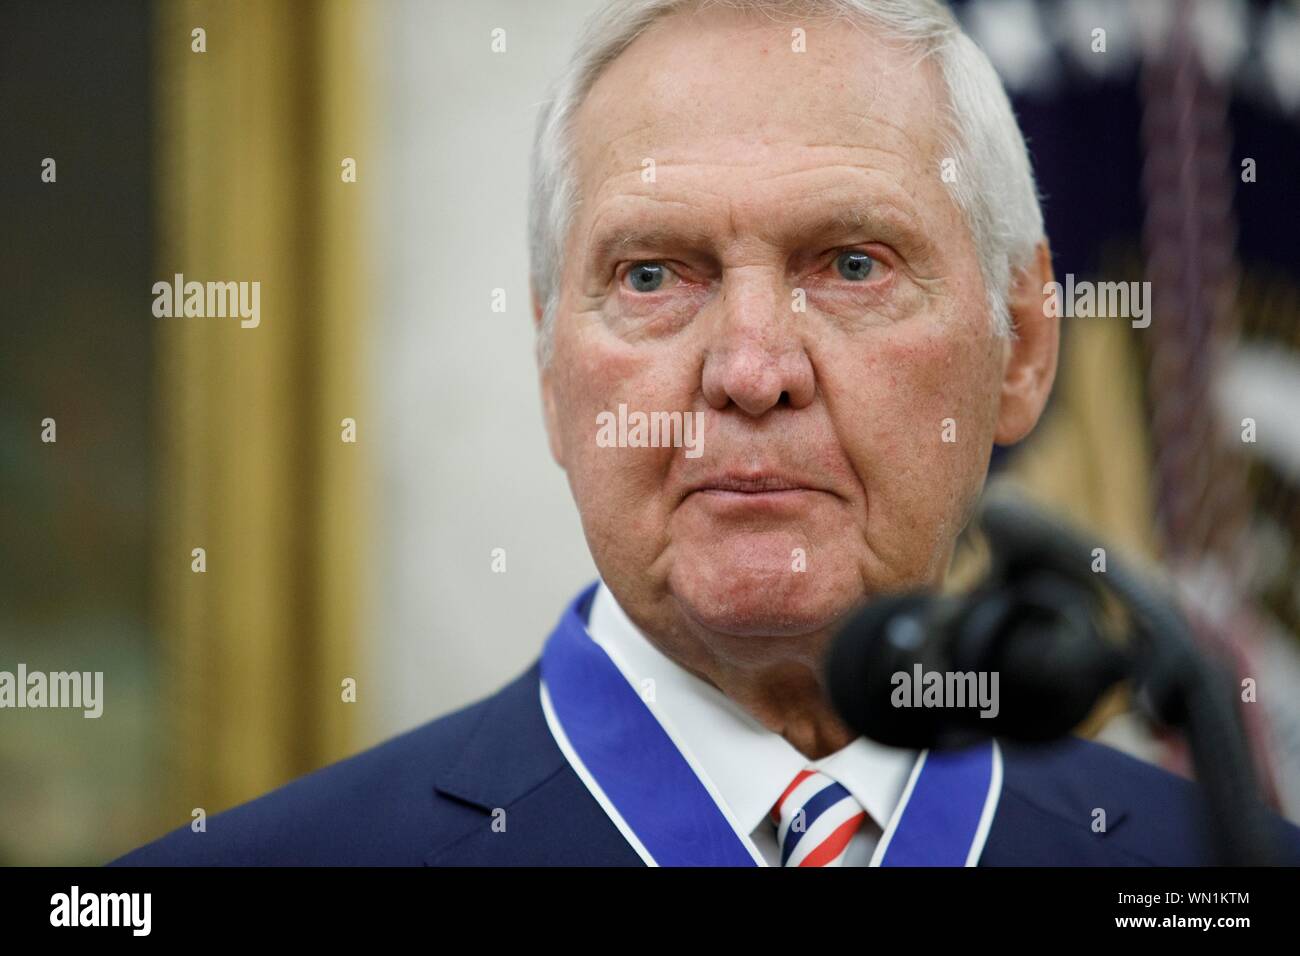 United States President Donald J. Trump presents the Presidential Medal of Freedom to NBA Hall of Fame member Jerry West during a ceremony inside of the Oval Office on September 5, 2019, at the White House in Washington. West, 81, graduated from West Virginia University and played fourteen seasons with the Los Angeles Lakers. Credit: Tom Brenner/Pool via CNP /MediaPunch Stock Photo